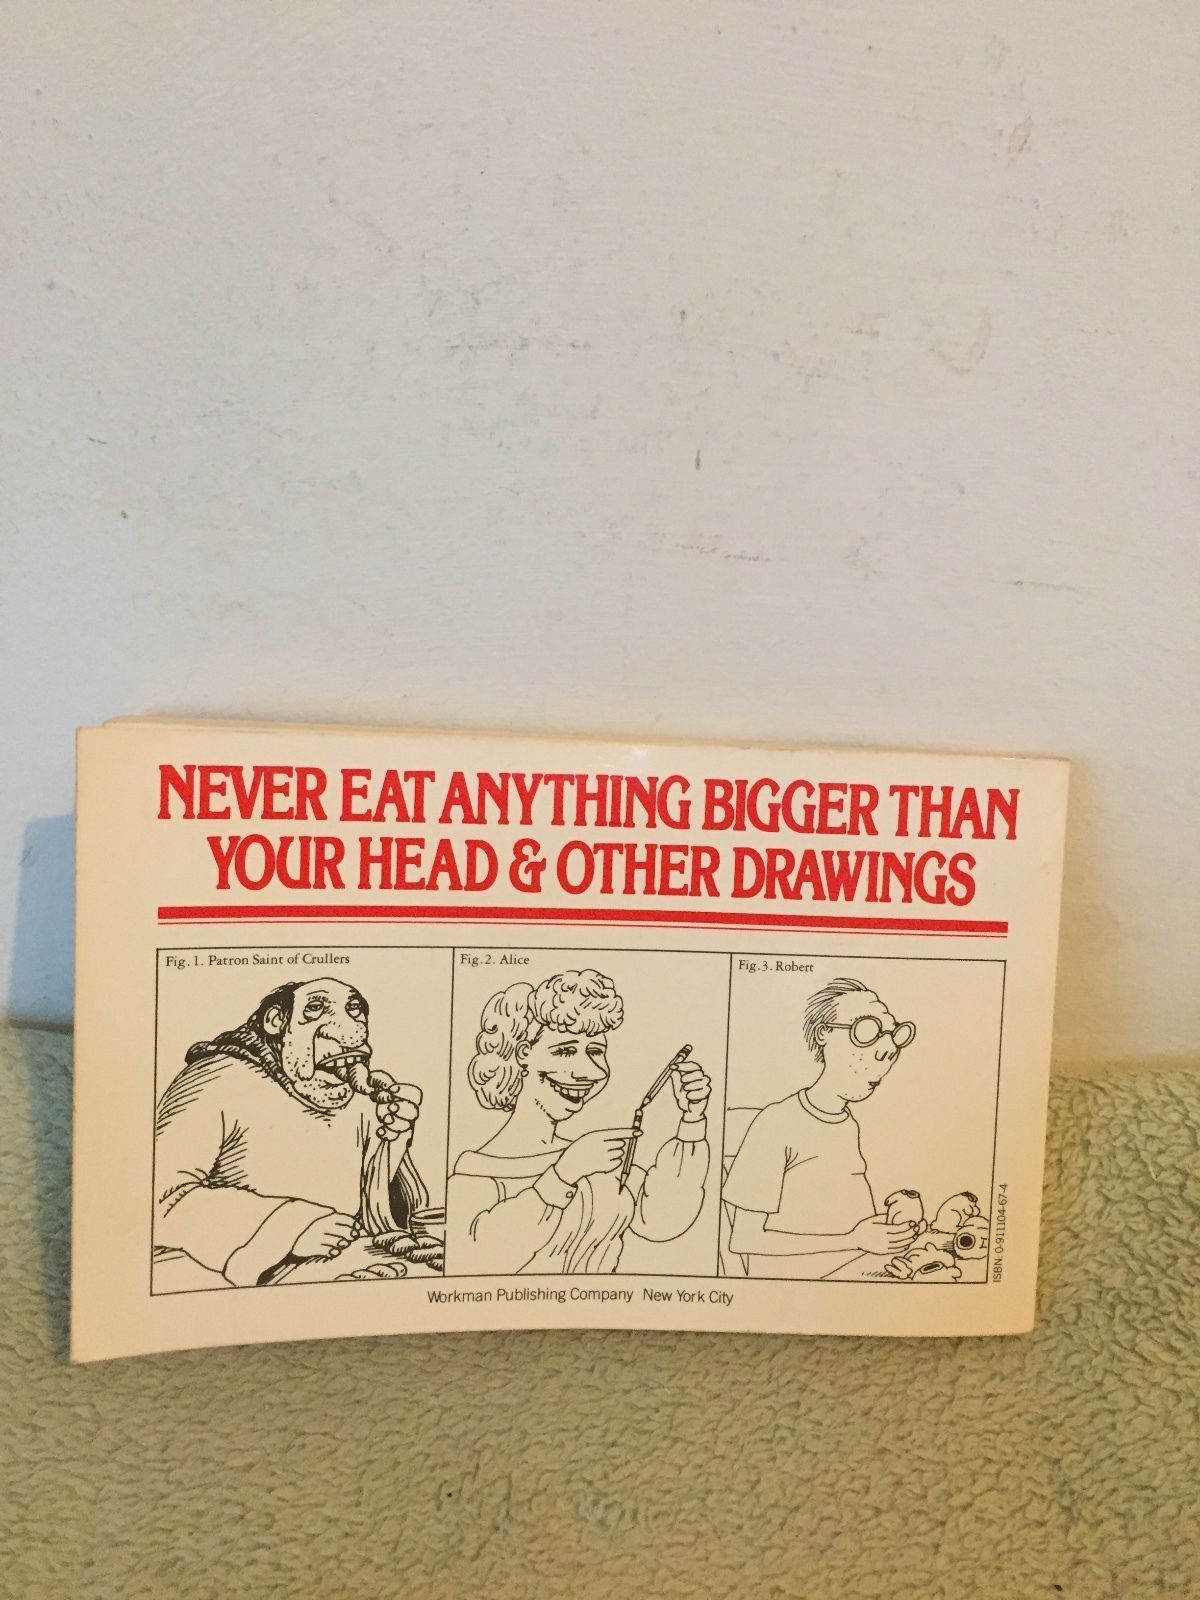 Never Eat Anything Bigger Than Your Head and Other Drawings (1976) by B